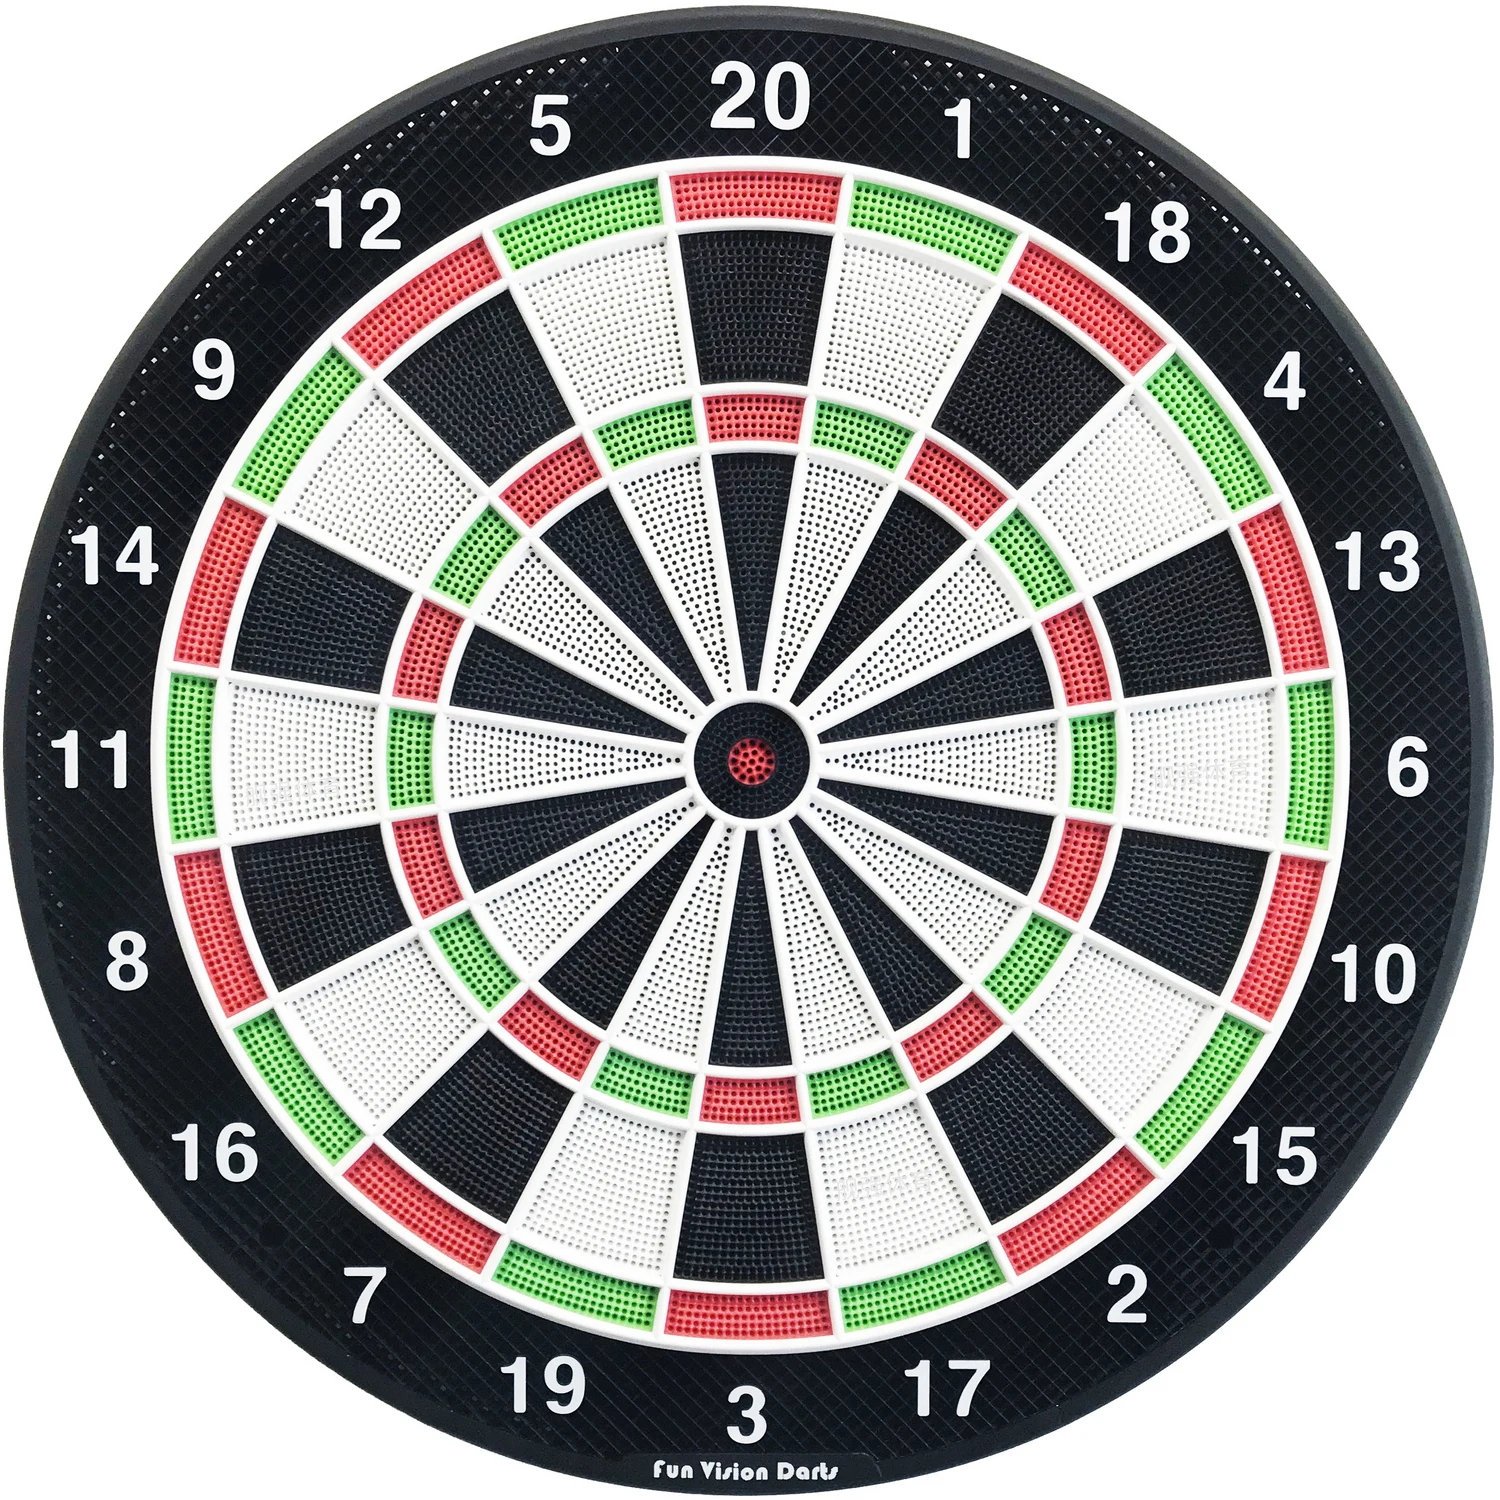 15.5Inch Soft Safety Dart Board Professional Competition Size 6 Dards Fitness Equipment(No Electronic Scoring Function And LED) гиперэкстензия oxygen fitness hyper press board